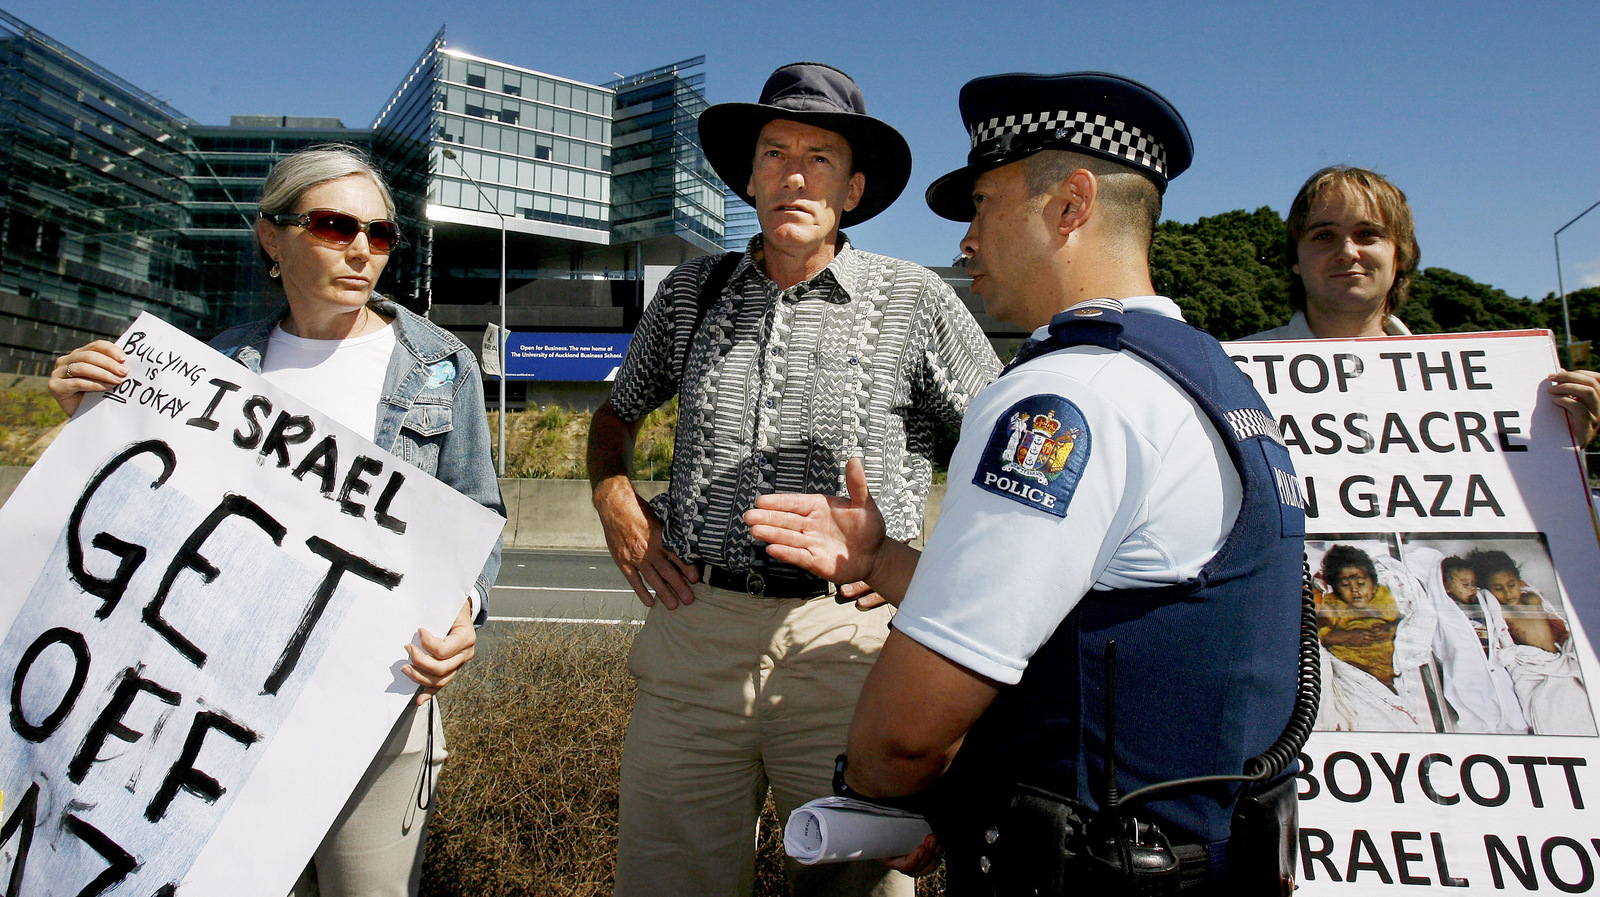 A police officer talks to protesters outside the ASB Tennis Classic in Auckland, New Zealand, Jan. 8, 2008. New Zealanders protested Israeli player Shahar Peer's participation in the tournament following Israel's bombing of a United Nations school in a Gaza refugee camp. (AP/New Zealand Herald, Greg Bowker)